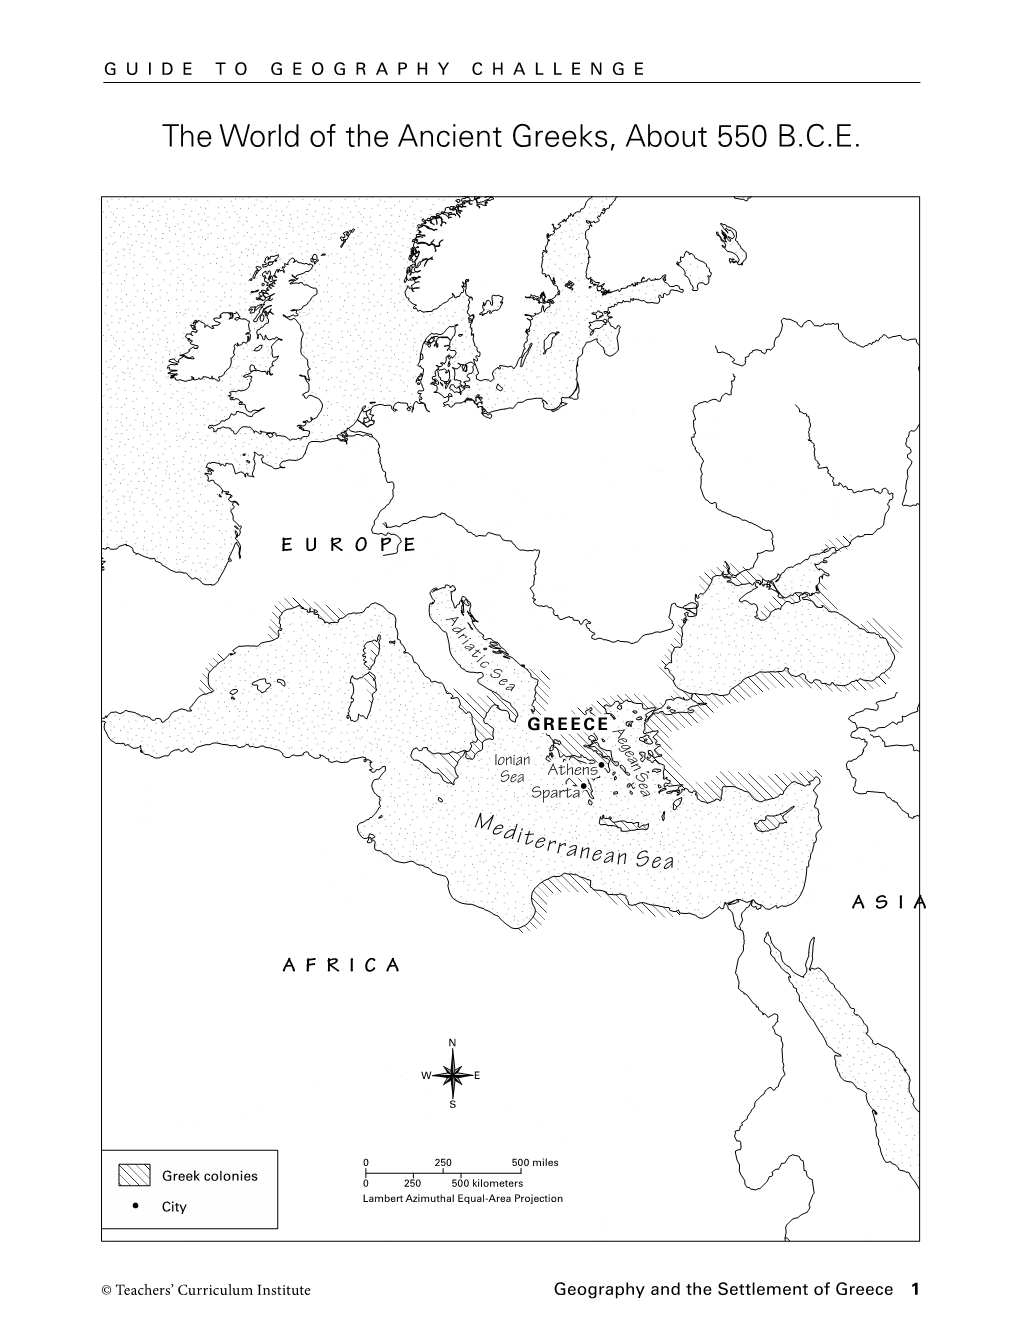 The World of the Ancient Greeks, About 550 B.C.E